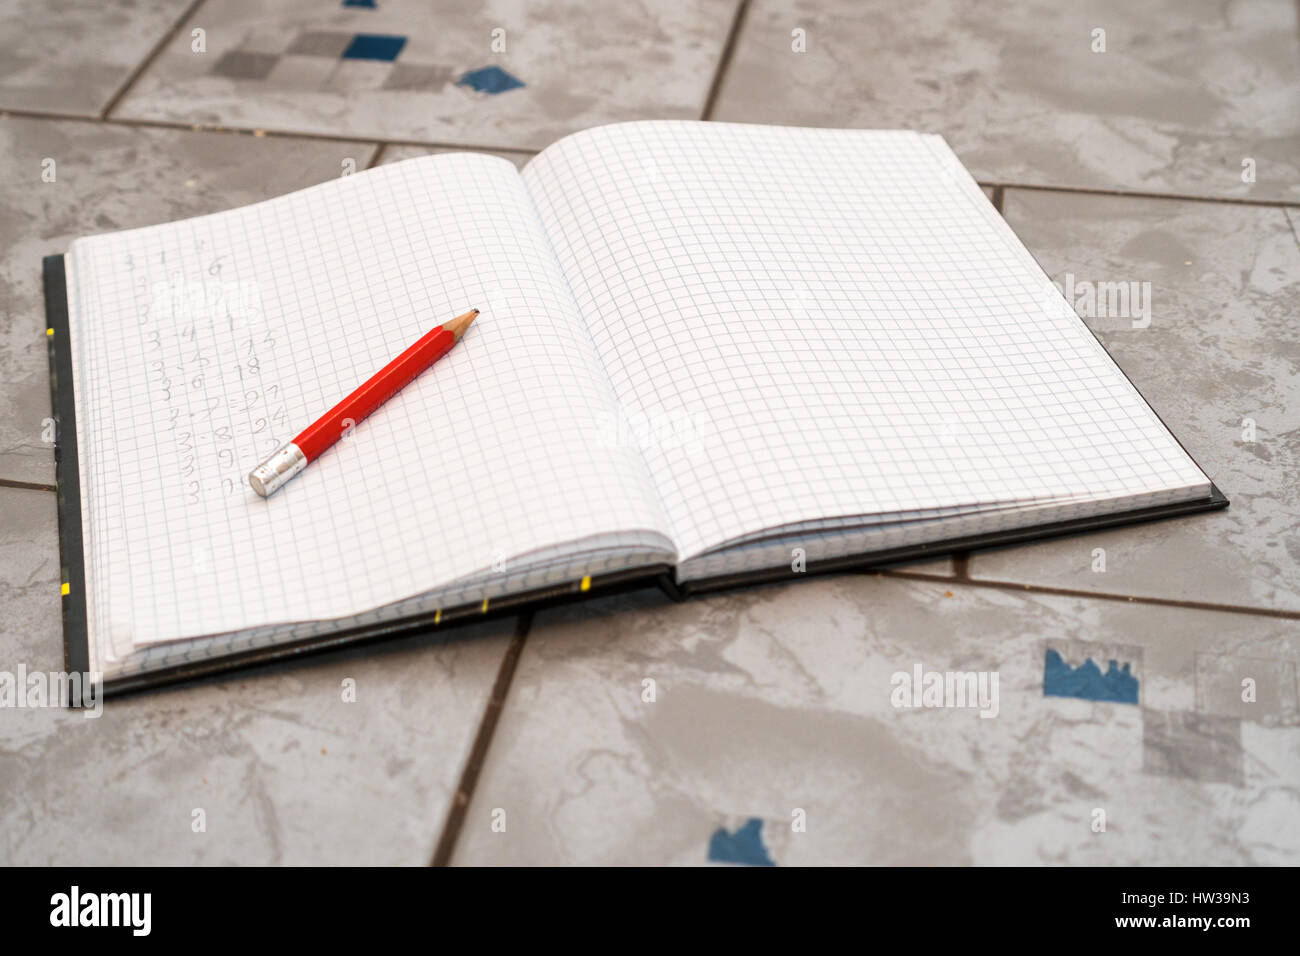 notebook in mathematics with handwriten exercise and a pencil on ceramic surface desk Stock Photo